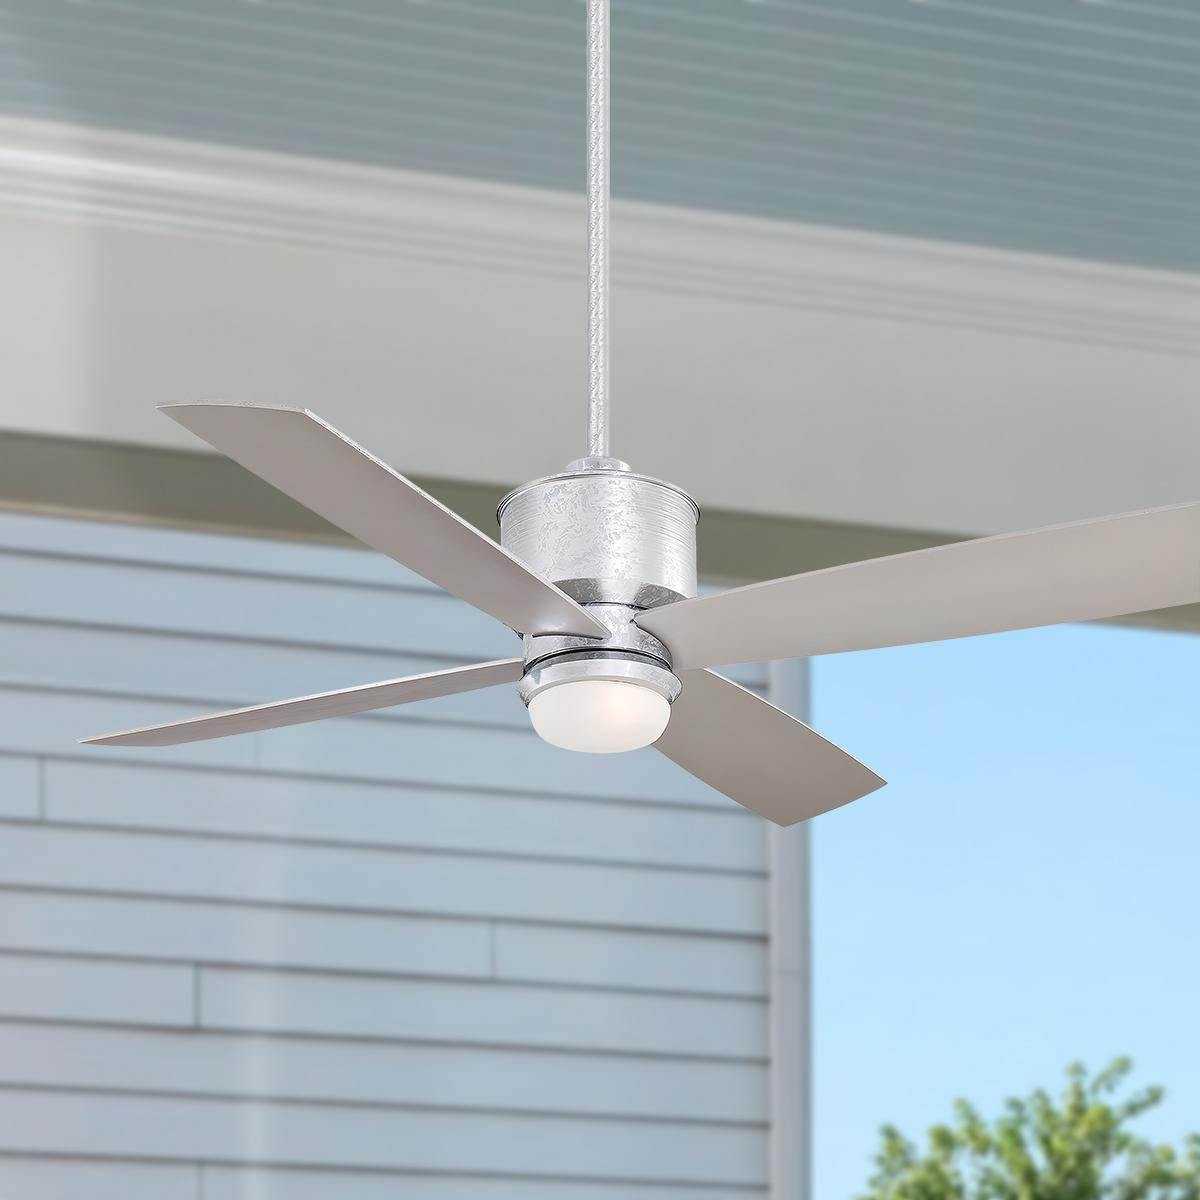 Strata 52 Inch Outdoor Ceiling Fan With